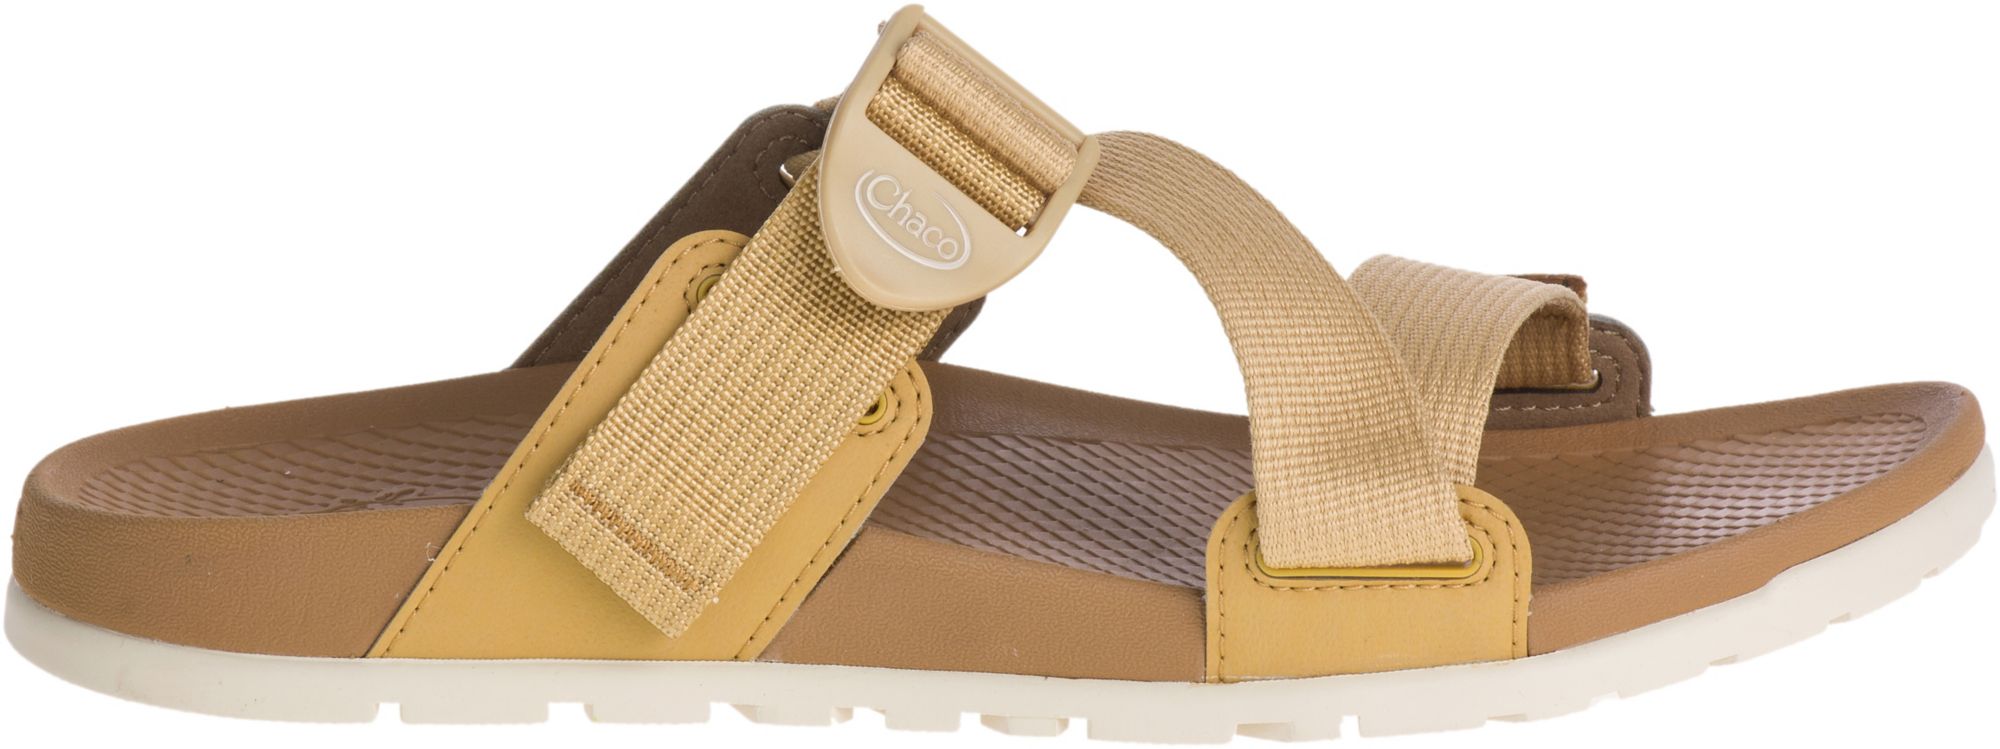 chacos womens 8